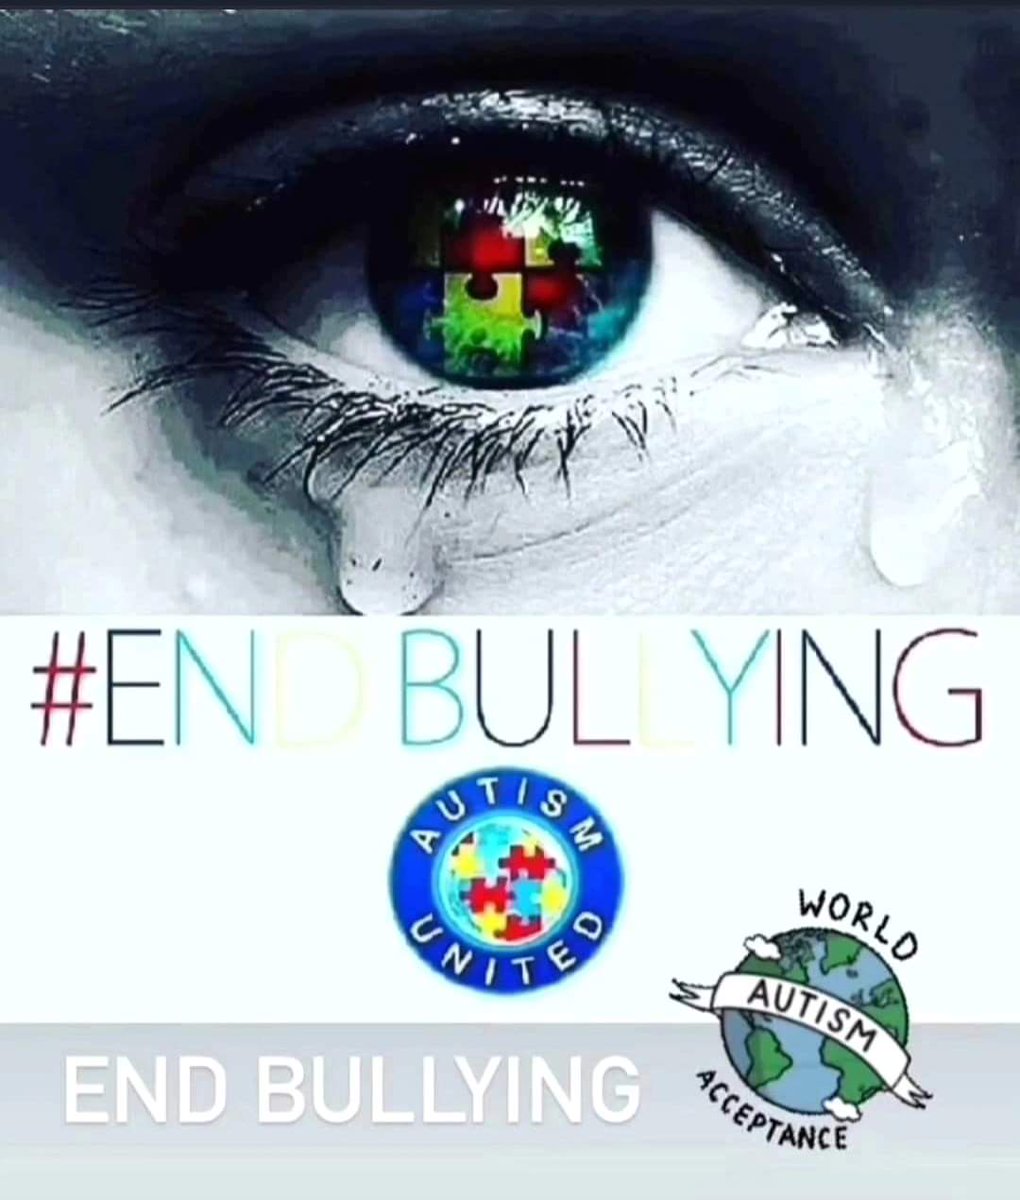 🗣 #endbullying Just so you know 🤔💙❤💚💜💛 #autismacceptance 🙌🏽 Every day is autism awareness day in our house. #autism #autismdad #autismawareness #autismfamily #autismparent #autismrocks  #differentnotless 🙋🏽‍♂️🙋‍♀️ Let's Band together to raise awareness 🙏❤💙👊🌍🫶🏾